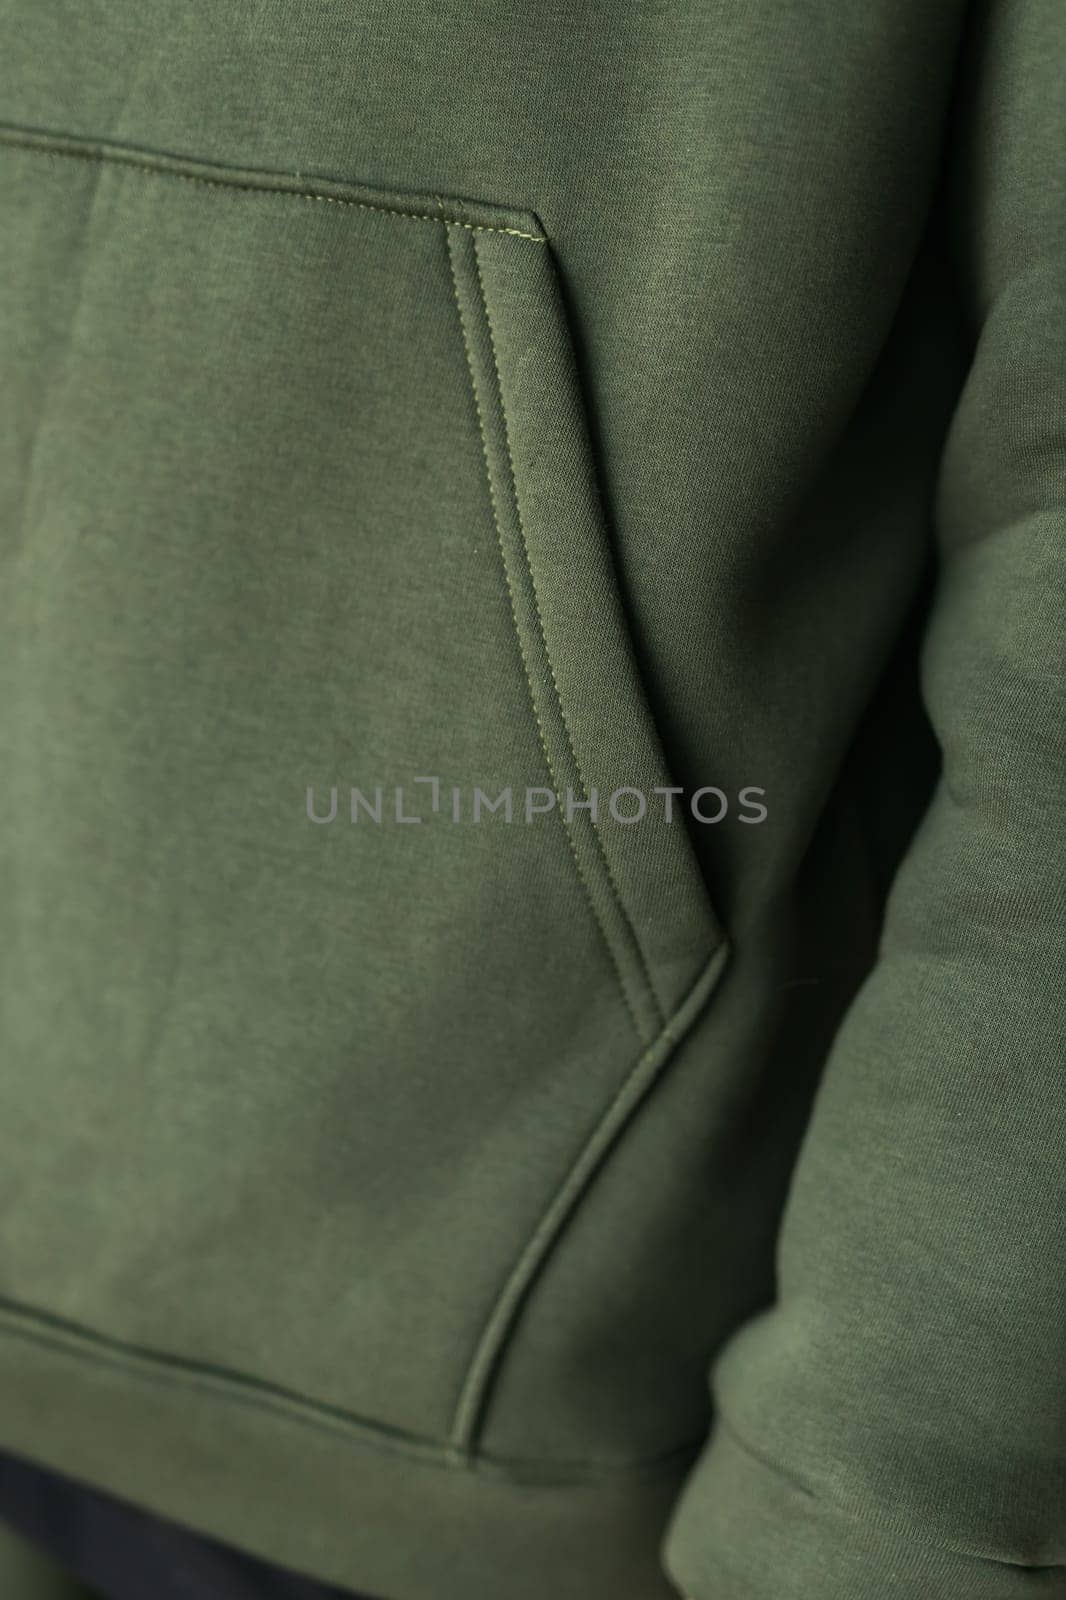 Close up of detail sweatshirt or hoodie - fabric and tailoring clothes design